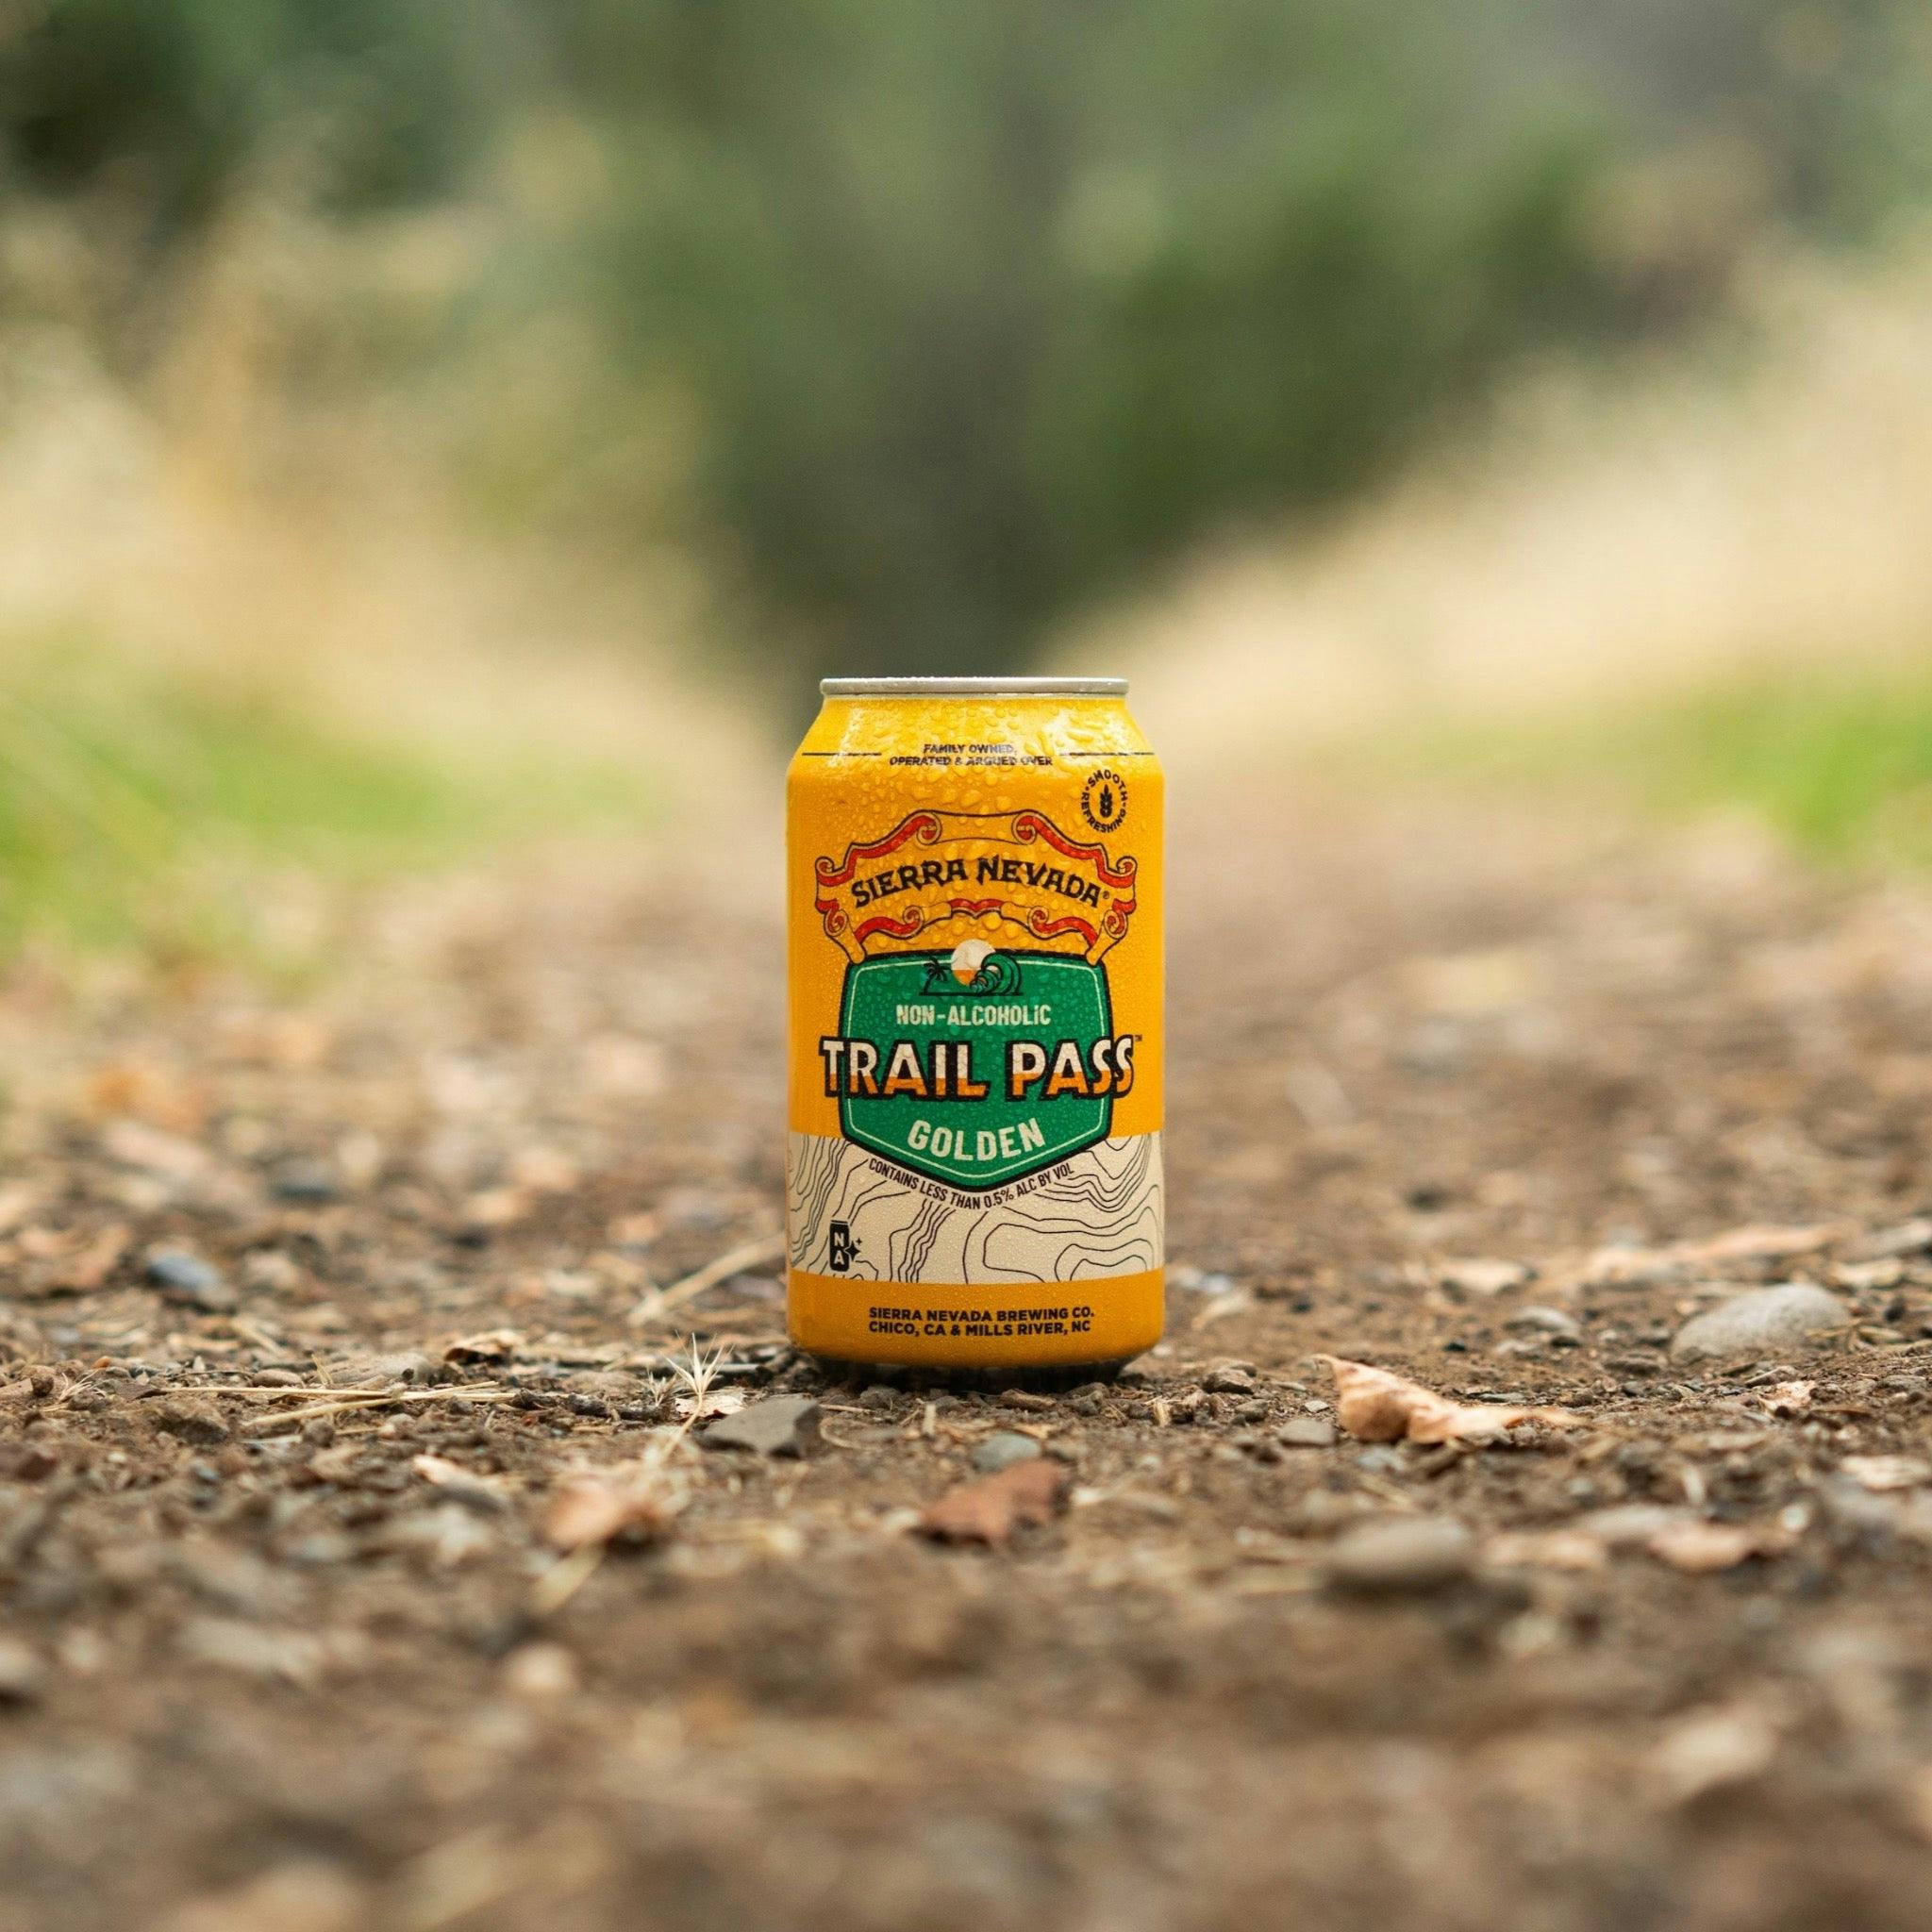 Sierra Nevada Brewing Co. Trail Pass Golden Non-Alcoholic Brew - A chilled can of Trail Pass Golden sits in the middle of a hiking trail